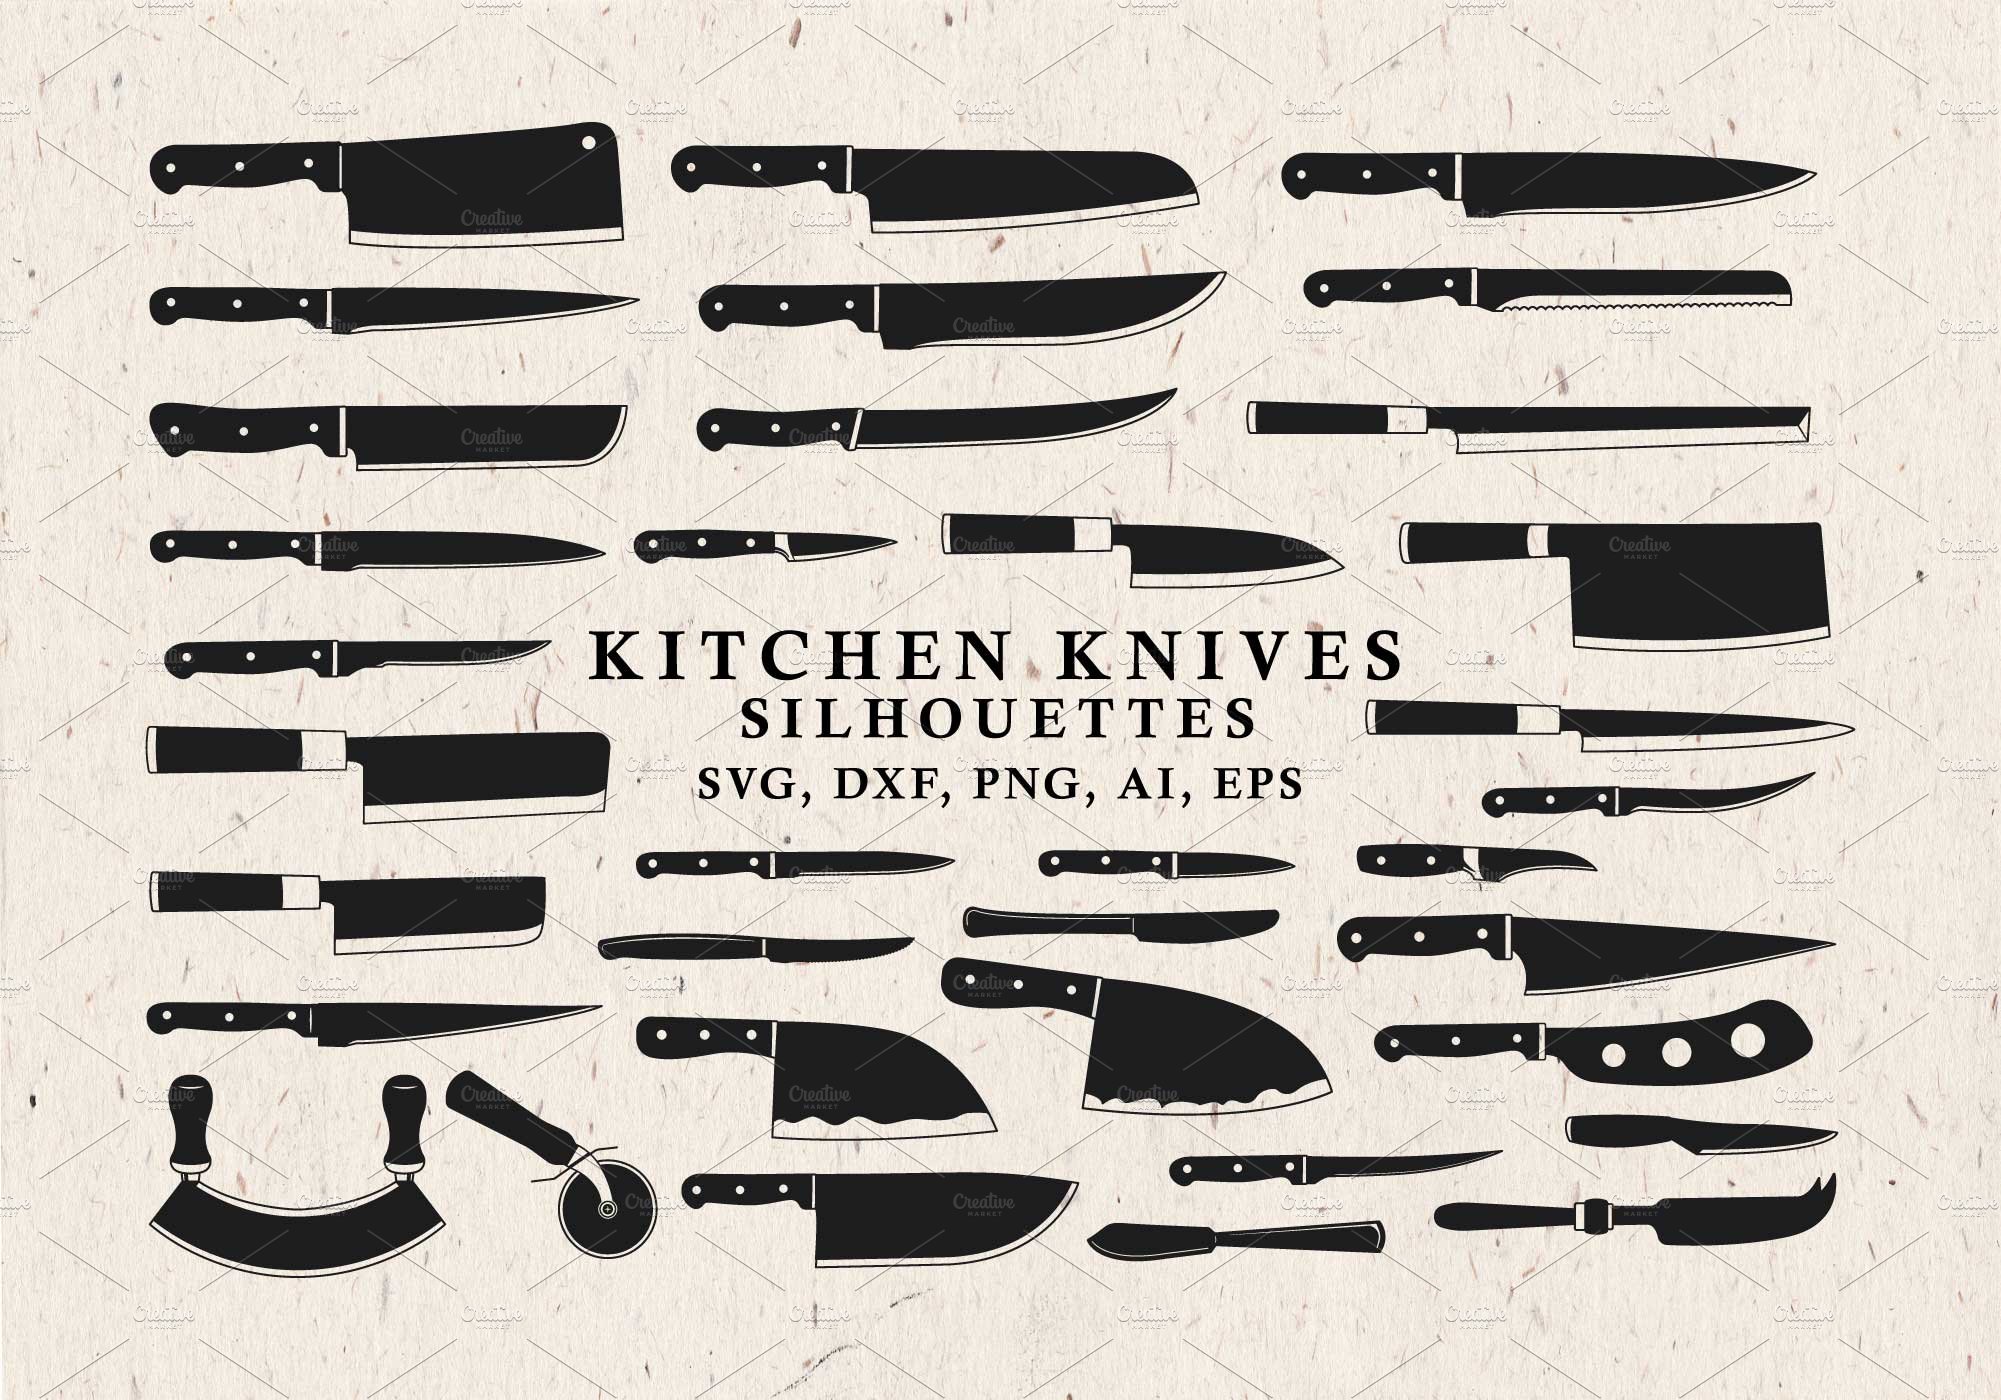 Kitchen Knives Silhouettes in Vector cover image.